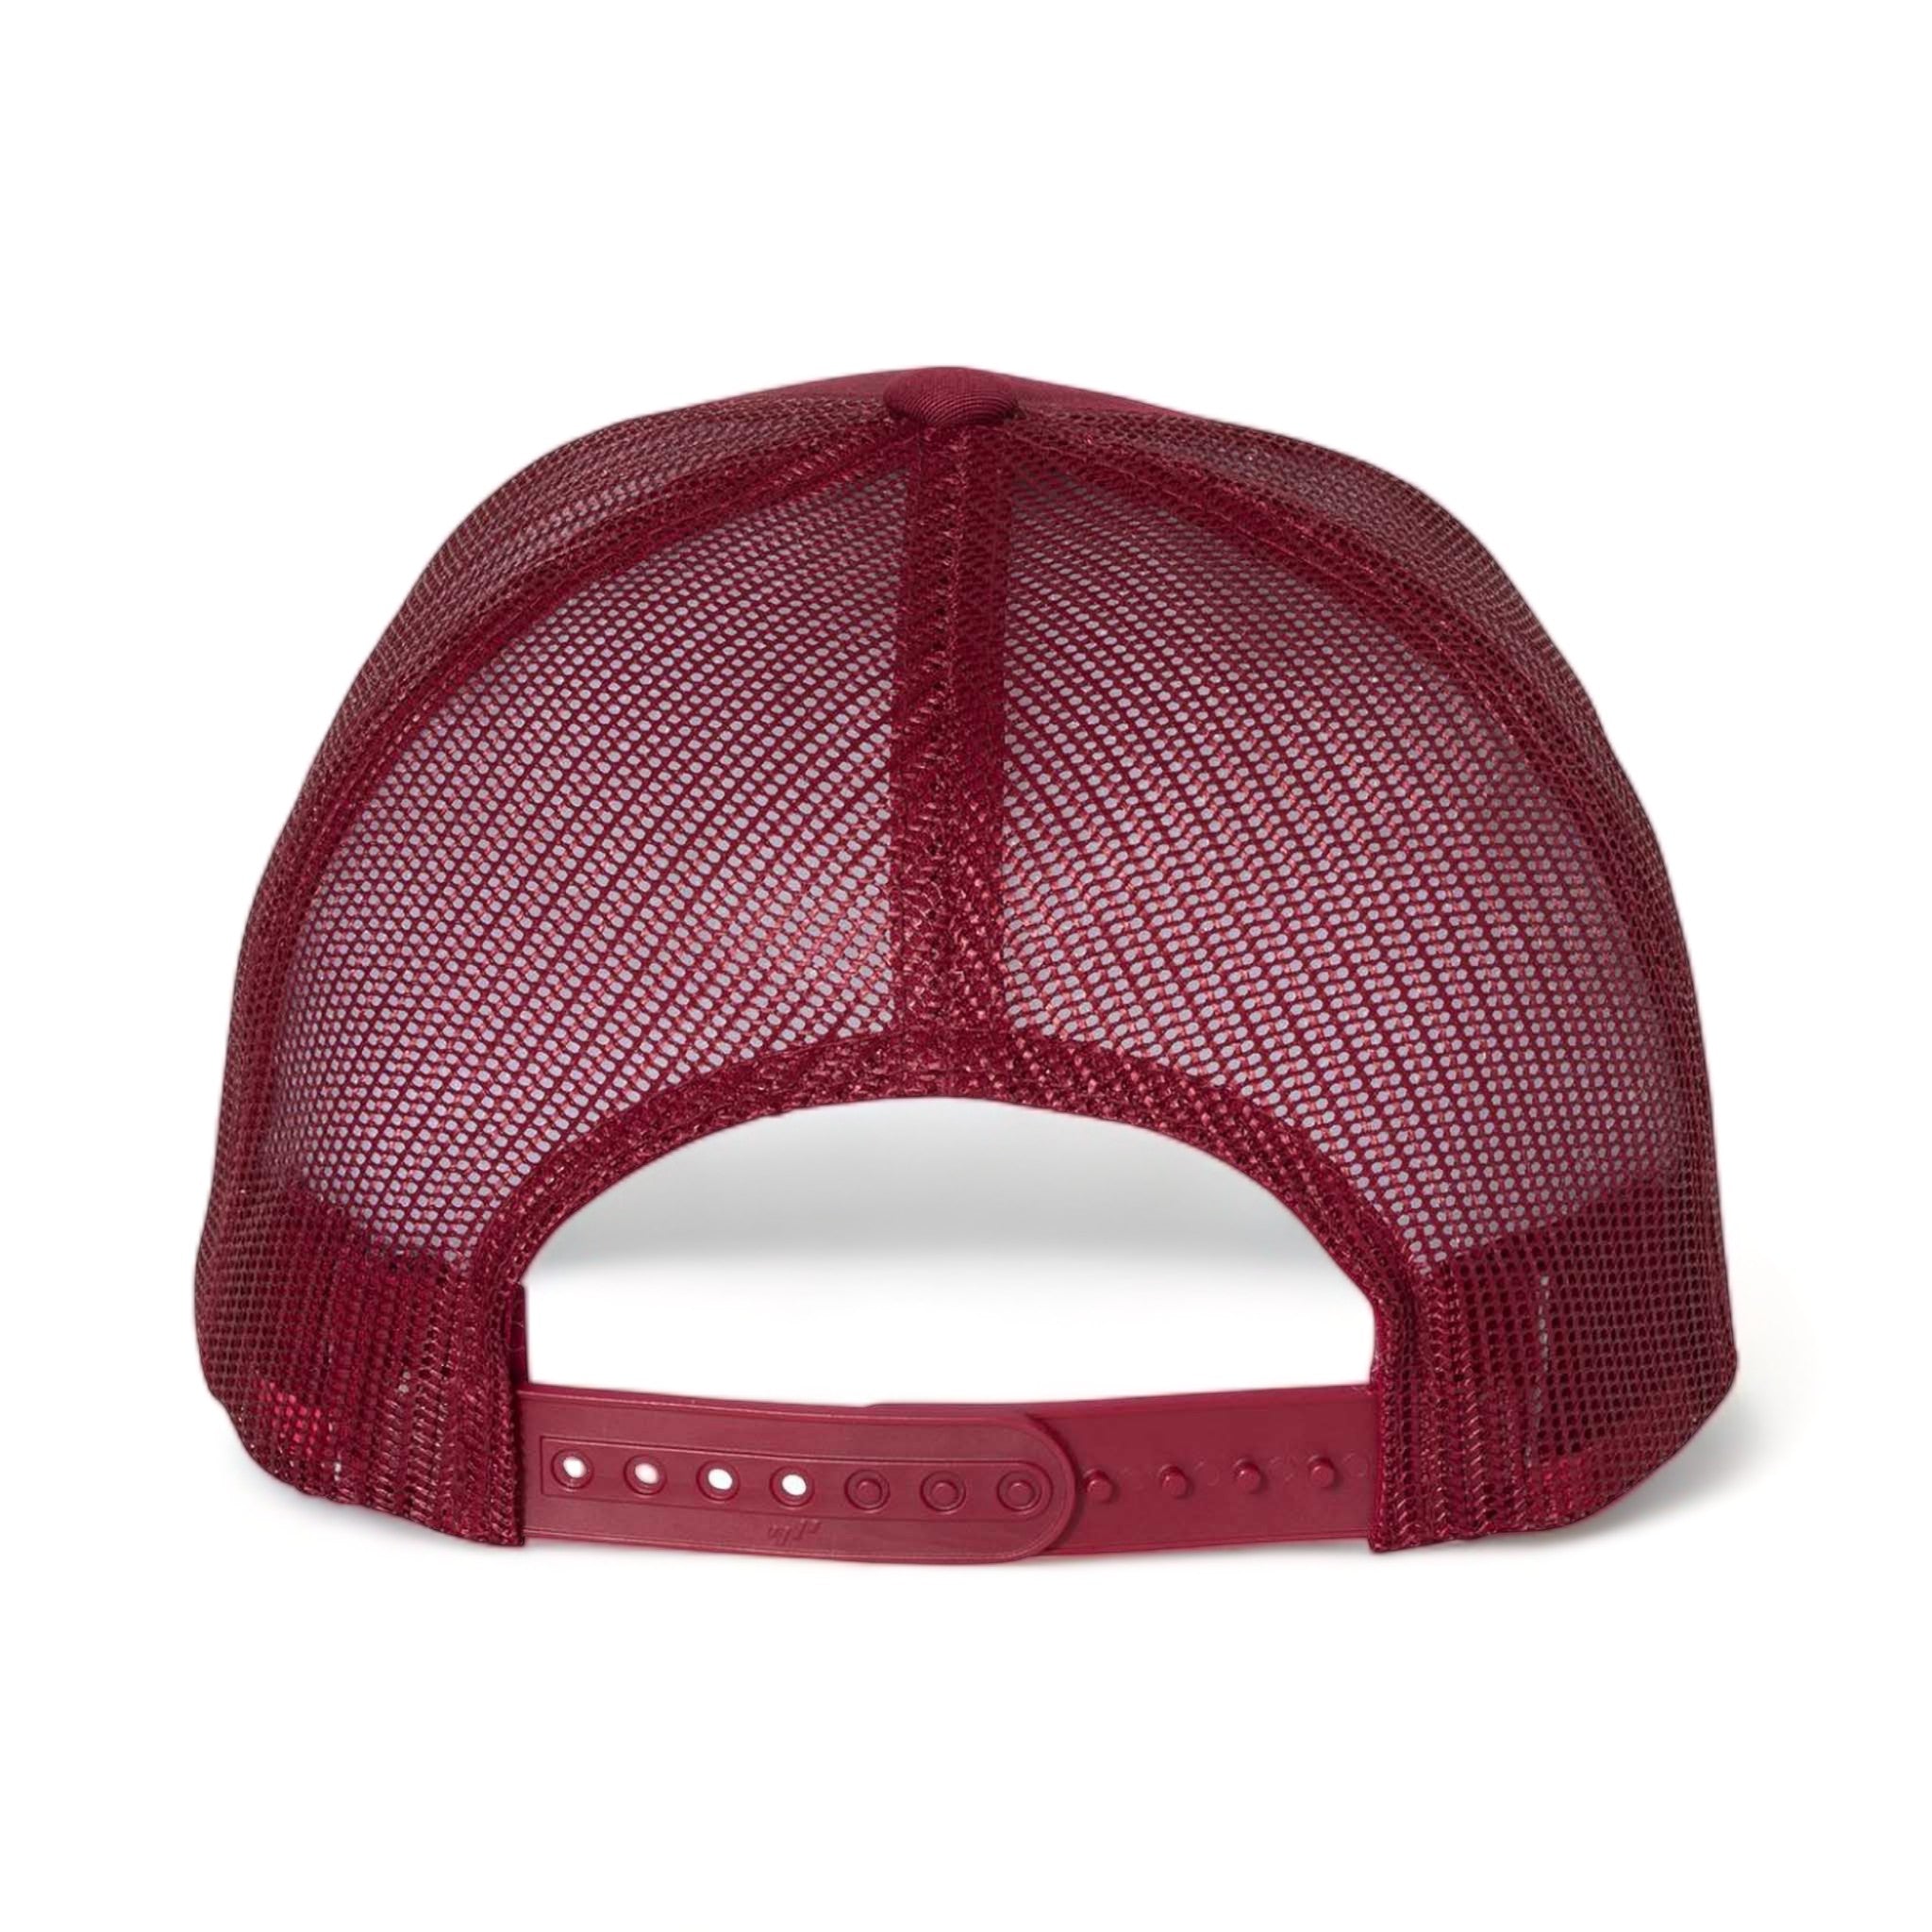 Back view of YP Classics 6606 custom hat in cranberry